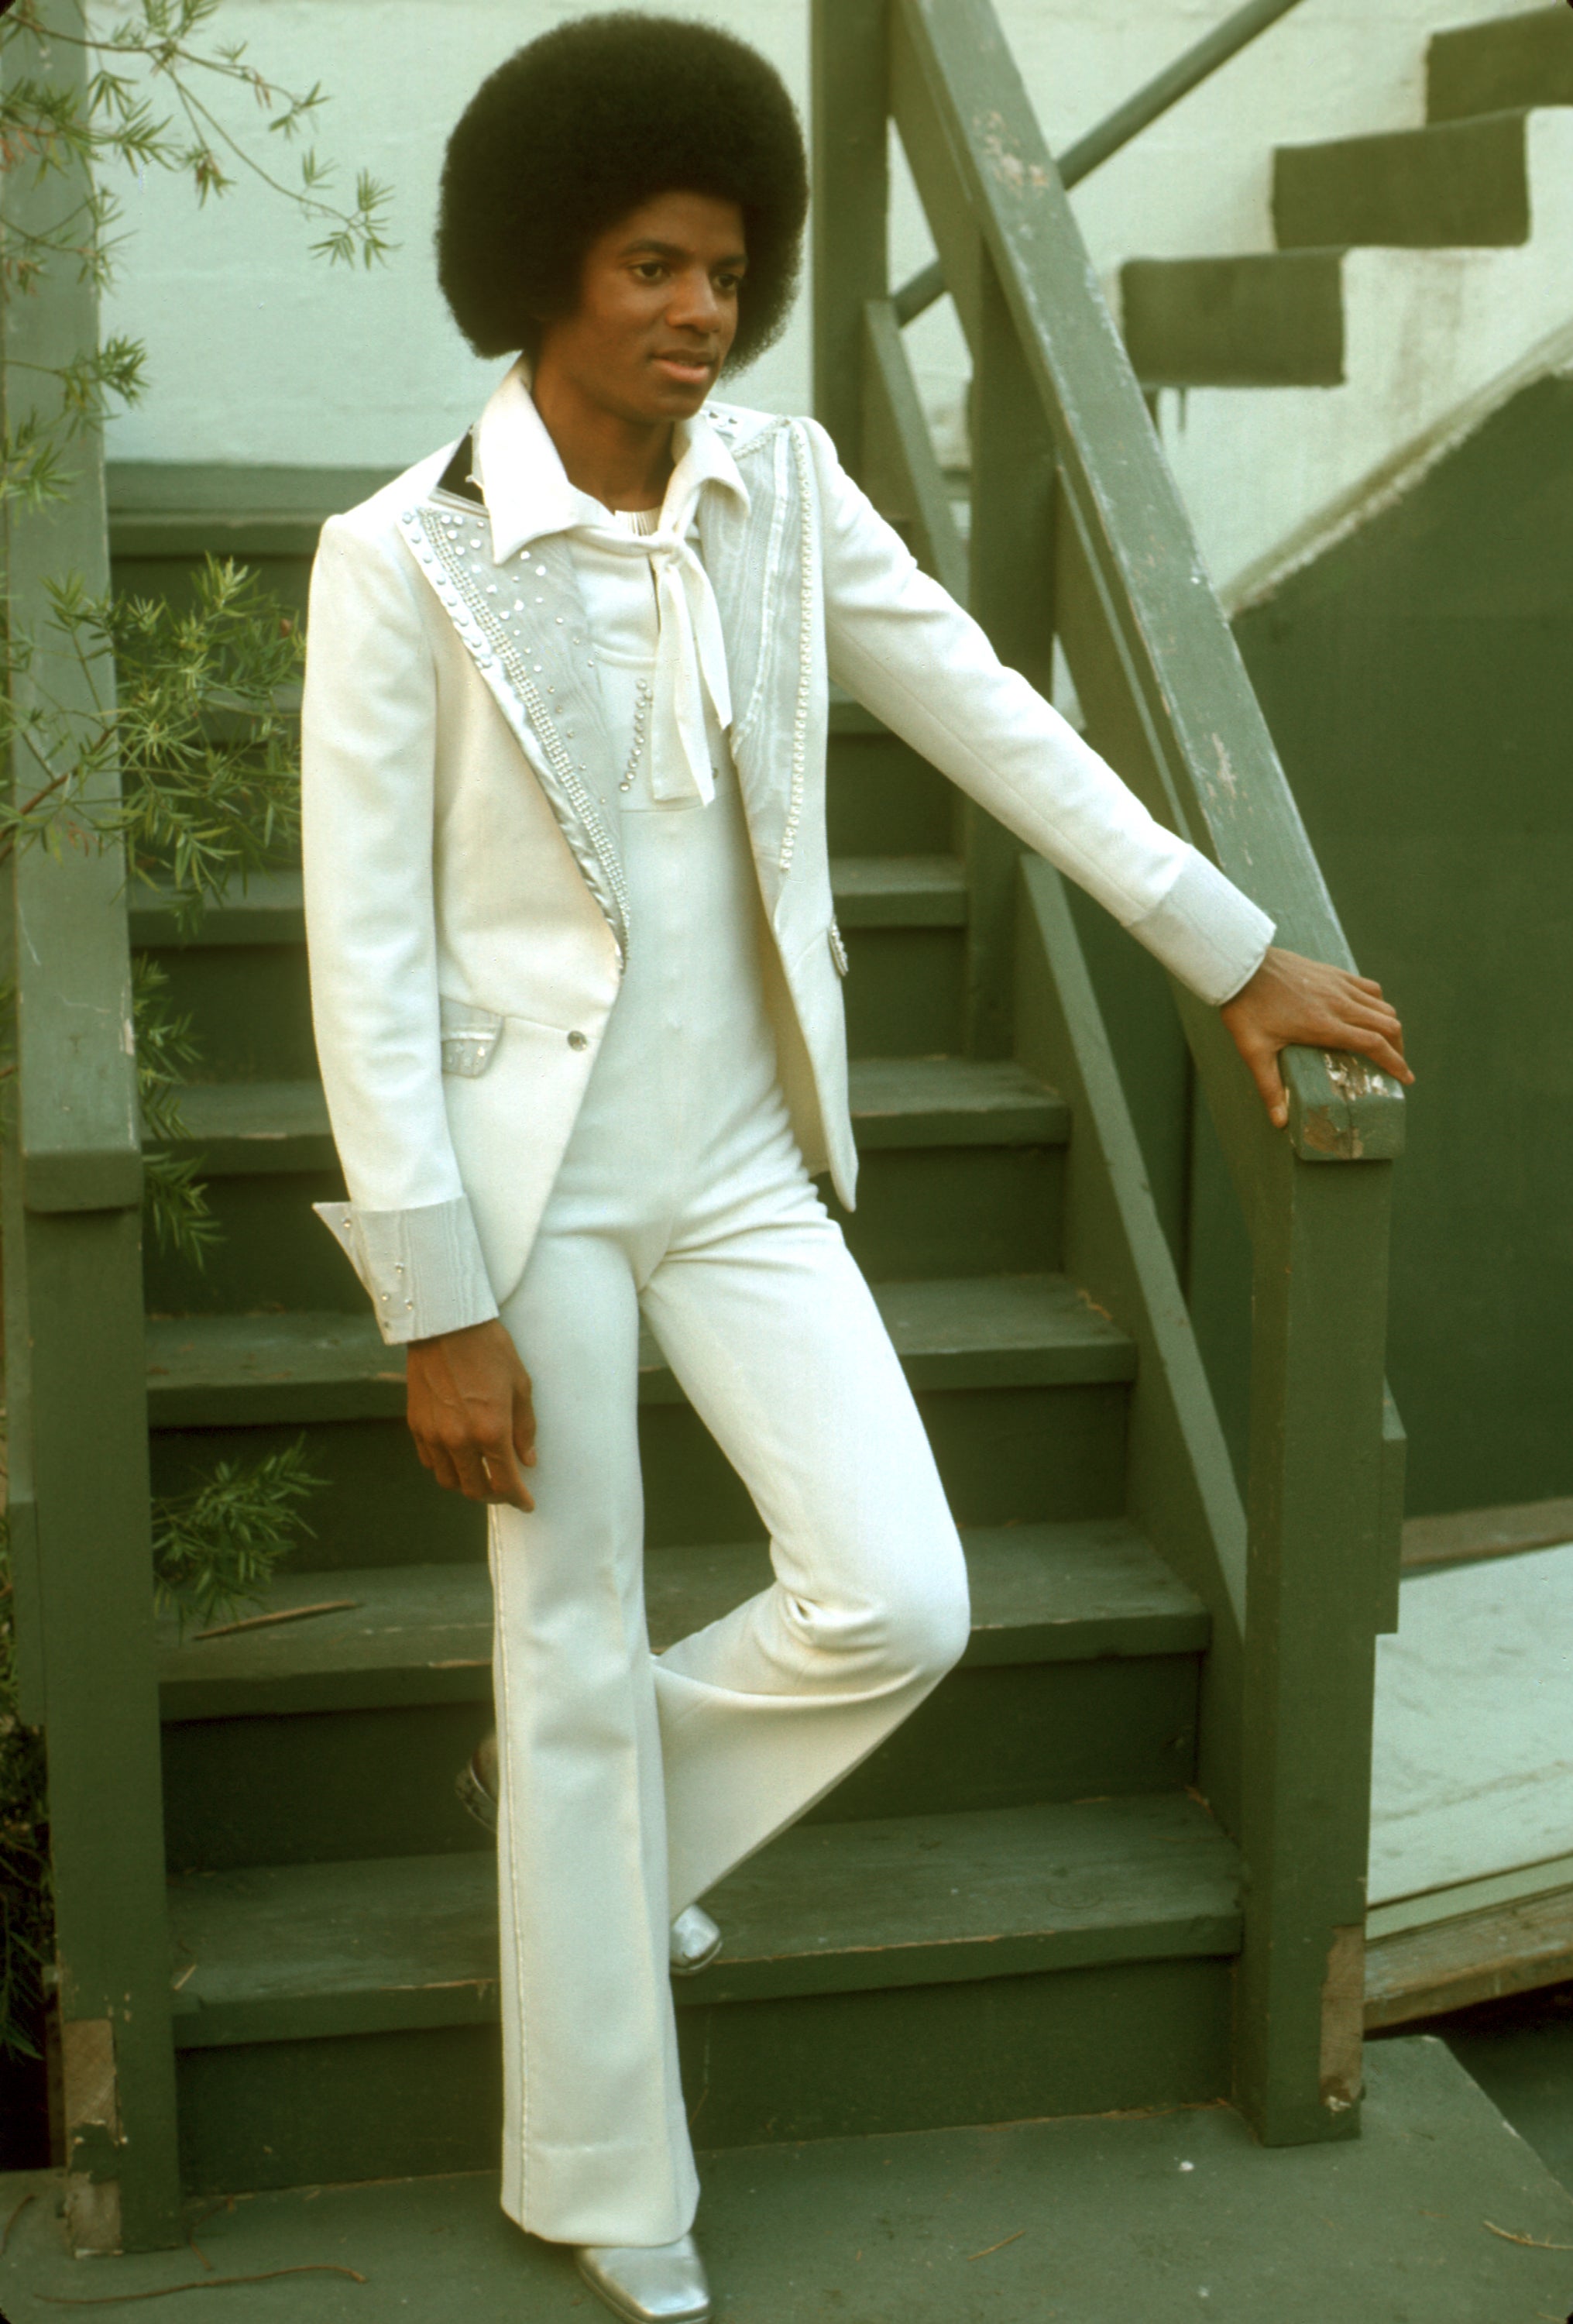 30 Photos That Prove Michael Jackson's Style Was the Epitome of Cool